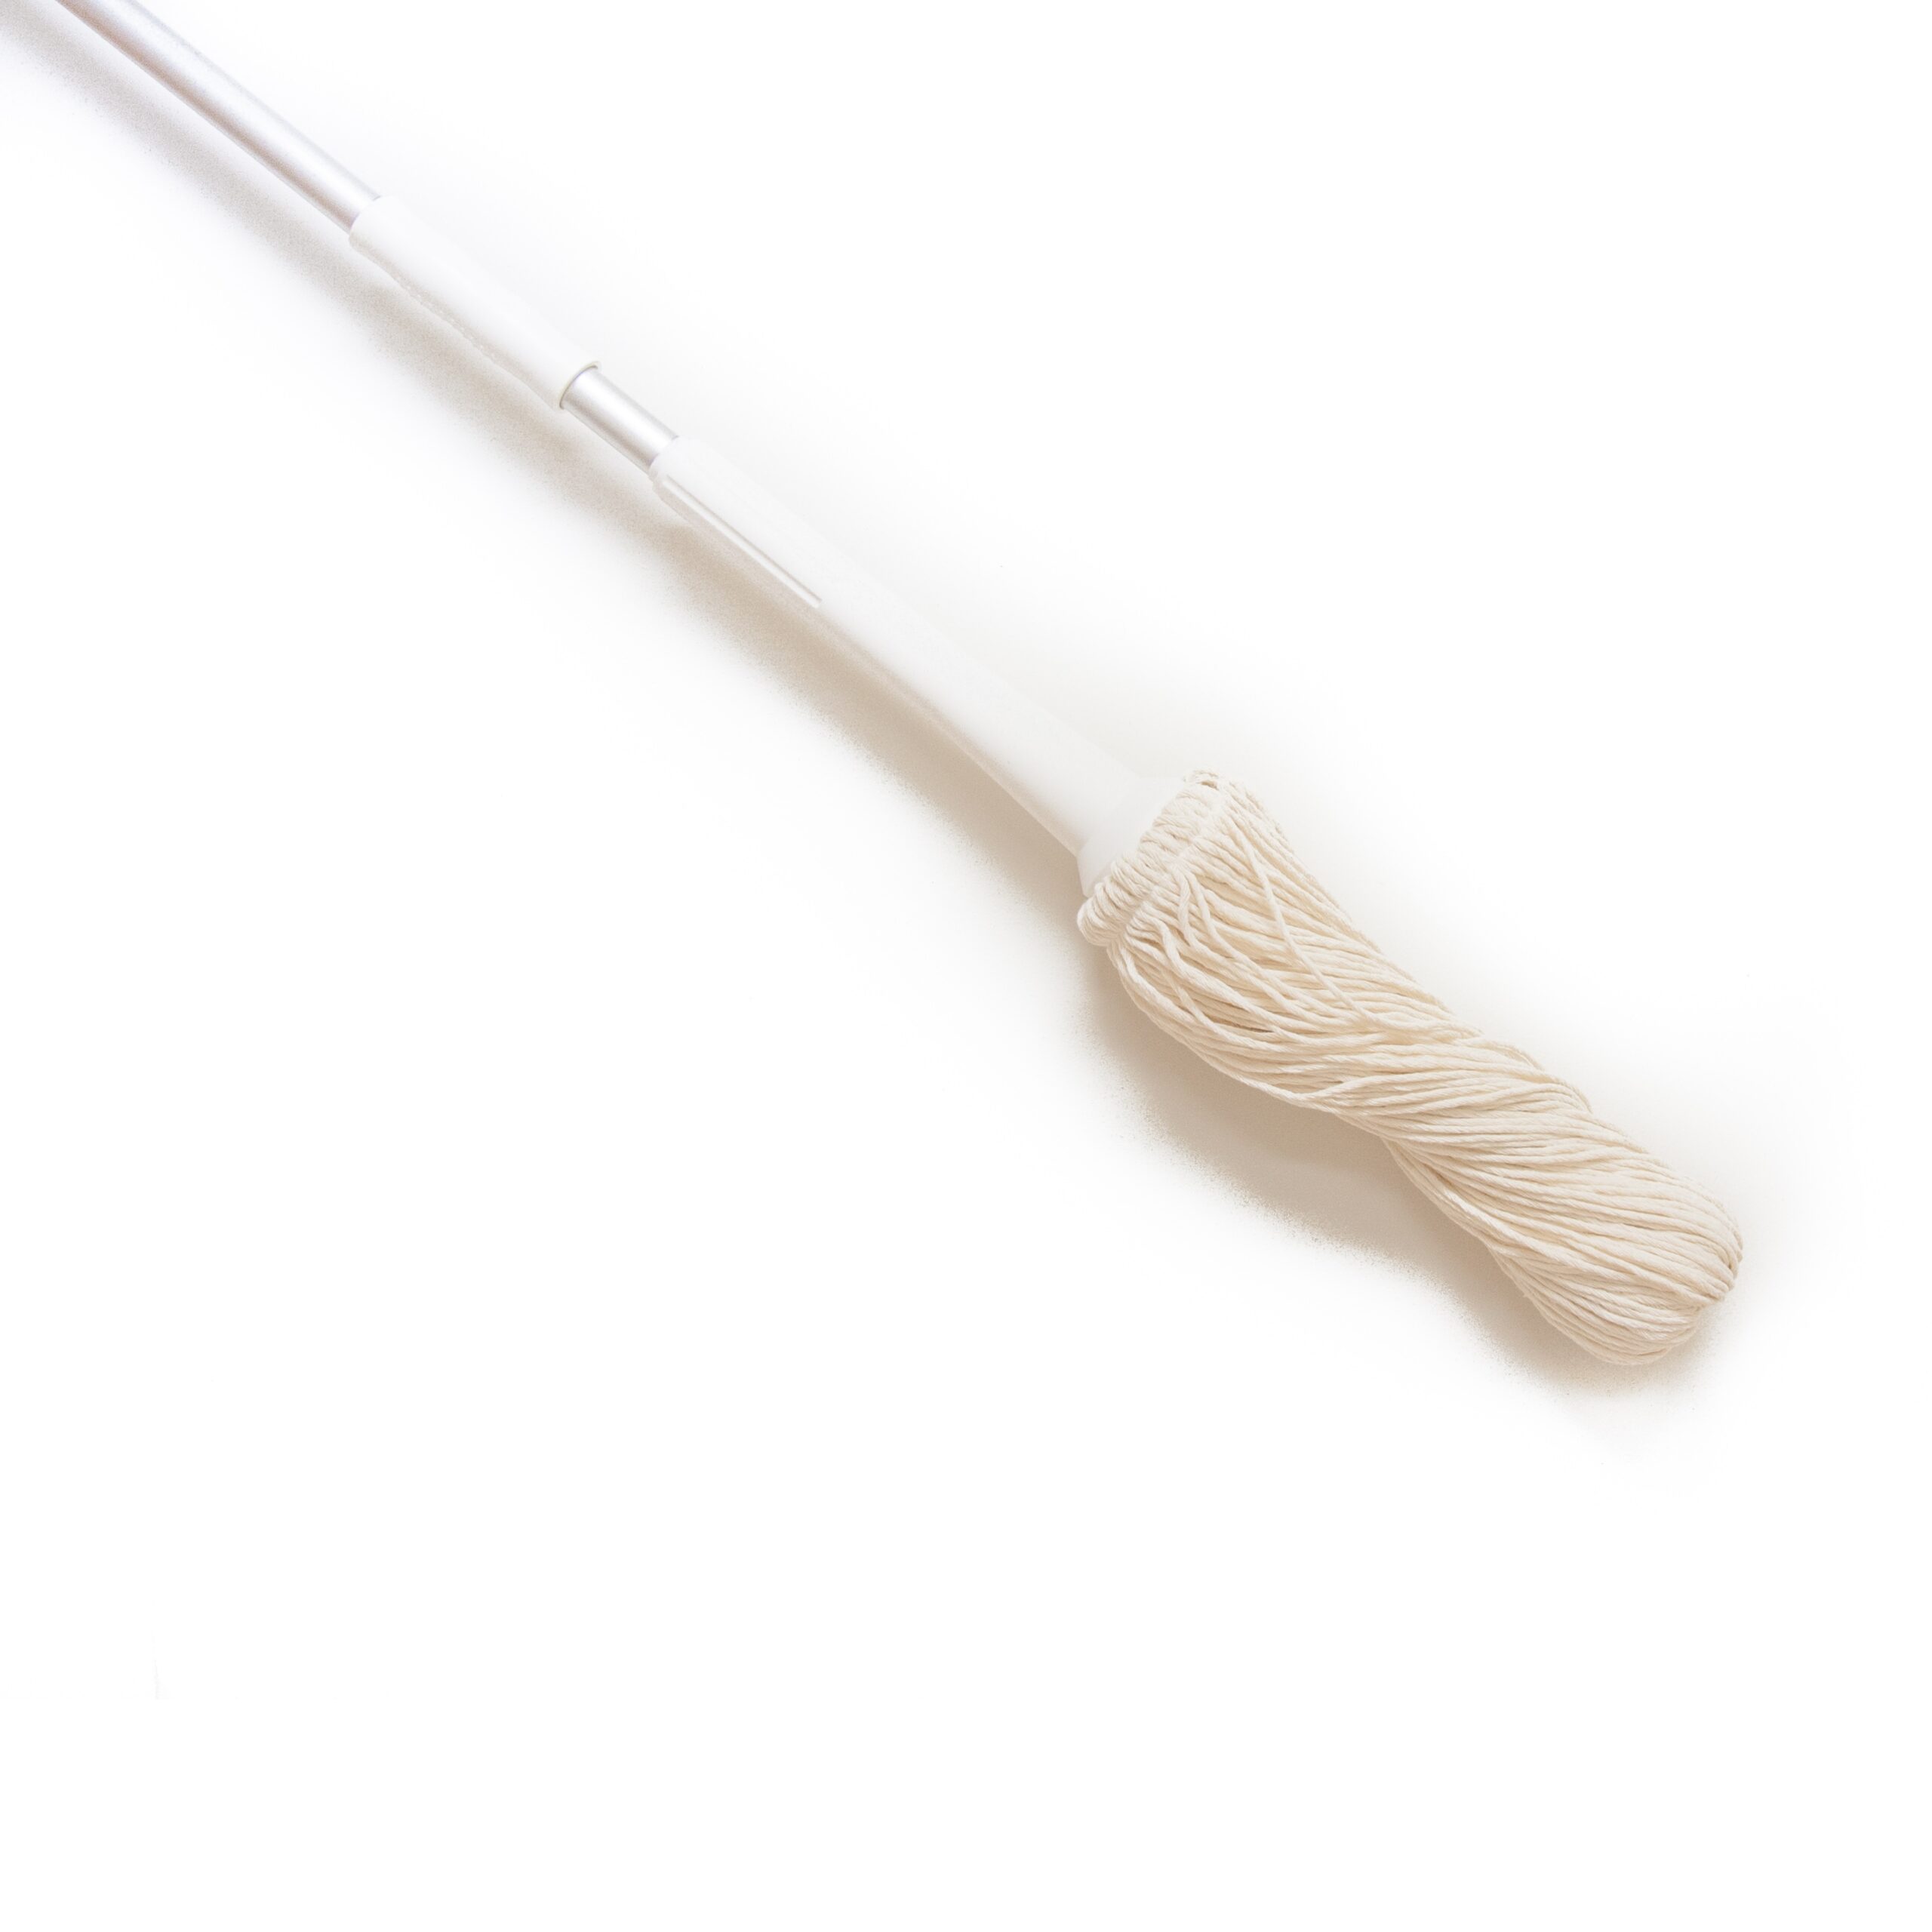 Replacement Mop Head- Silver White Swep Mop